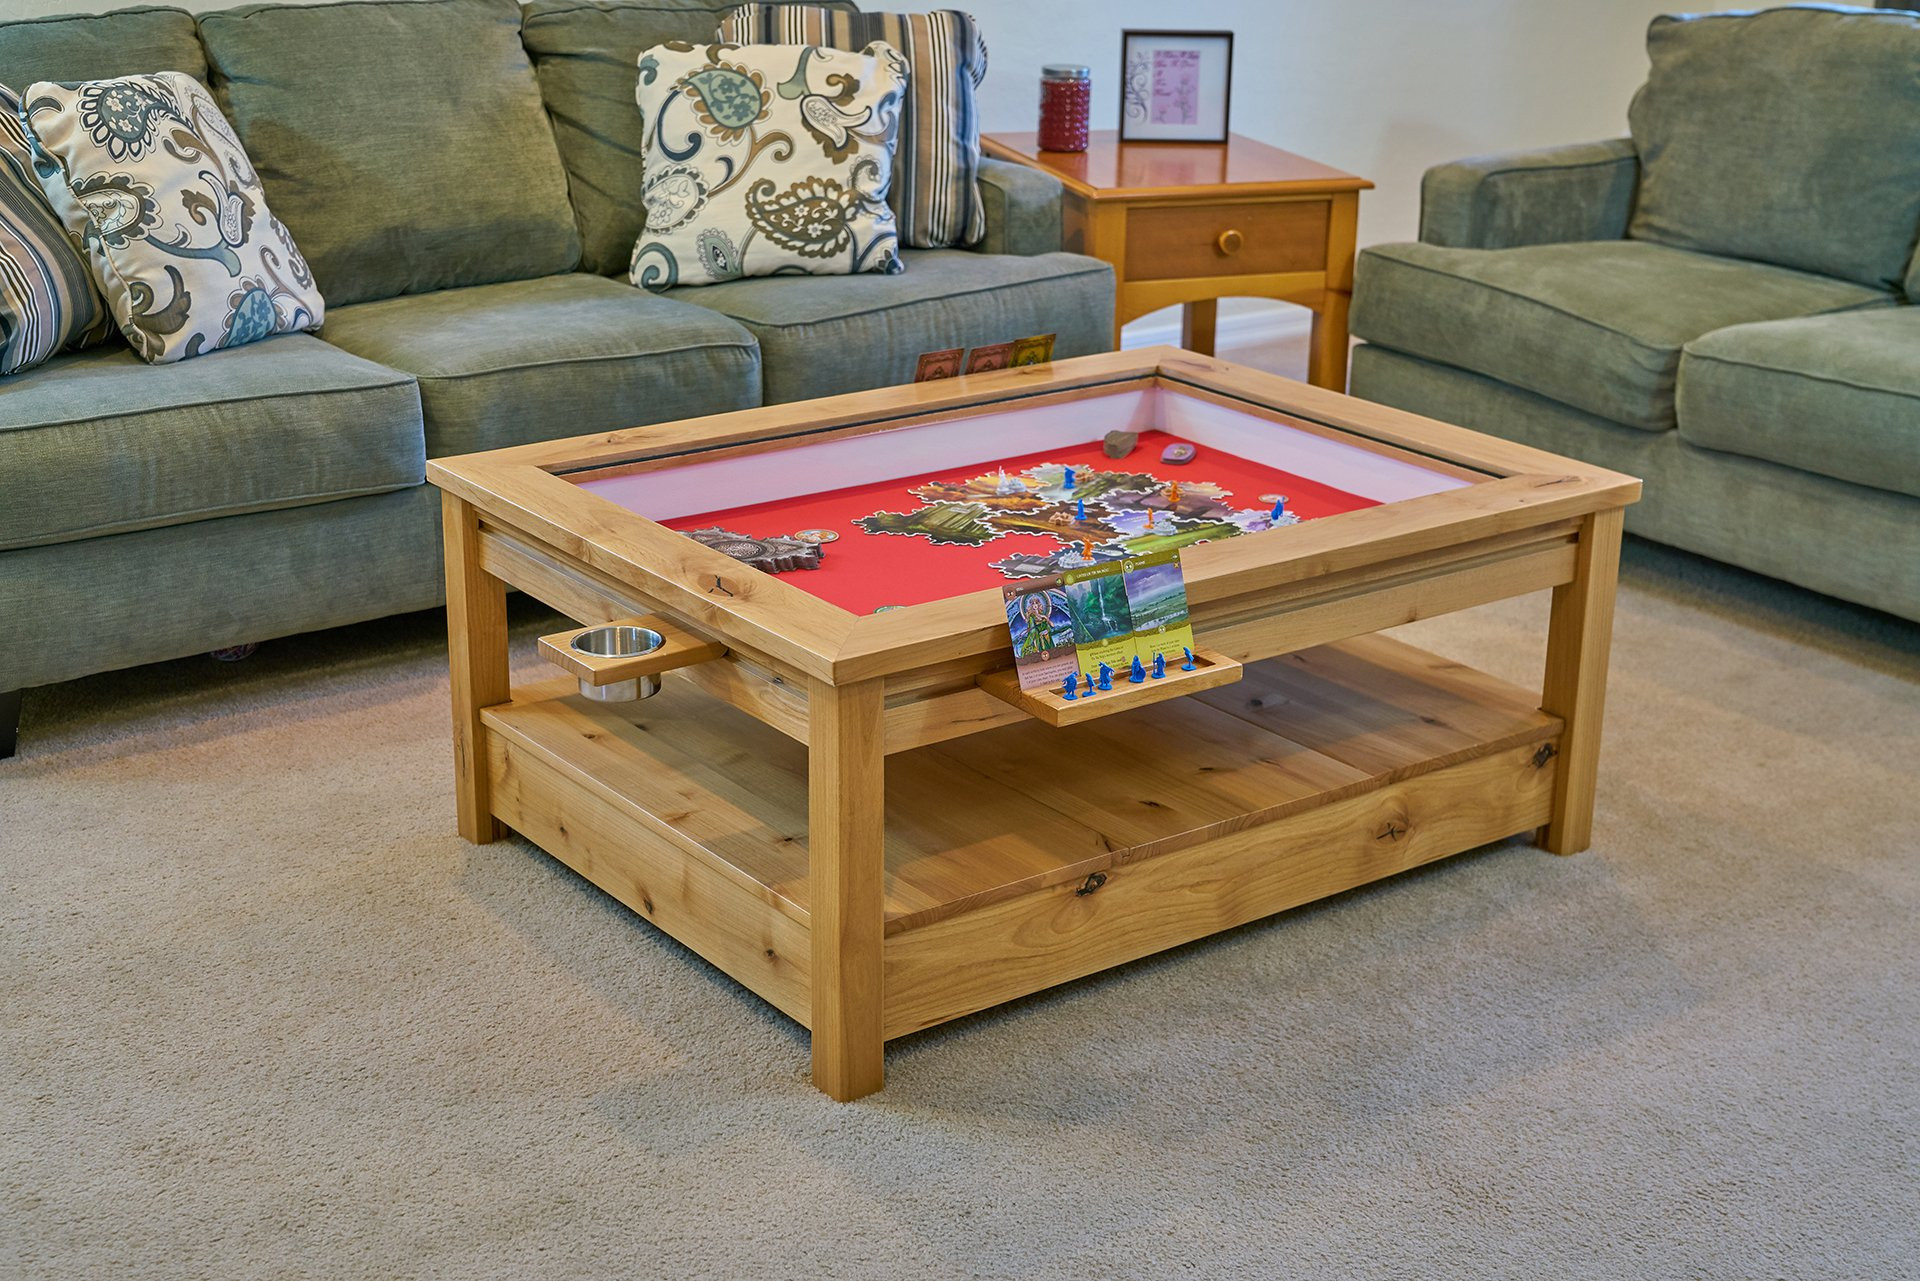 Living Room Game Table
 Uniquely Geek custom gaming table Viscount coffee table